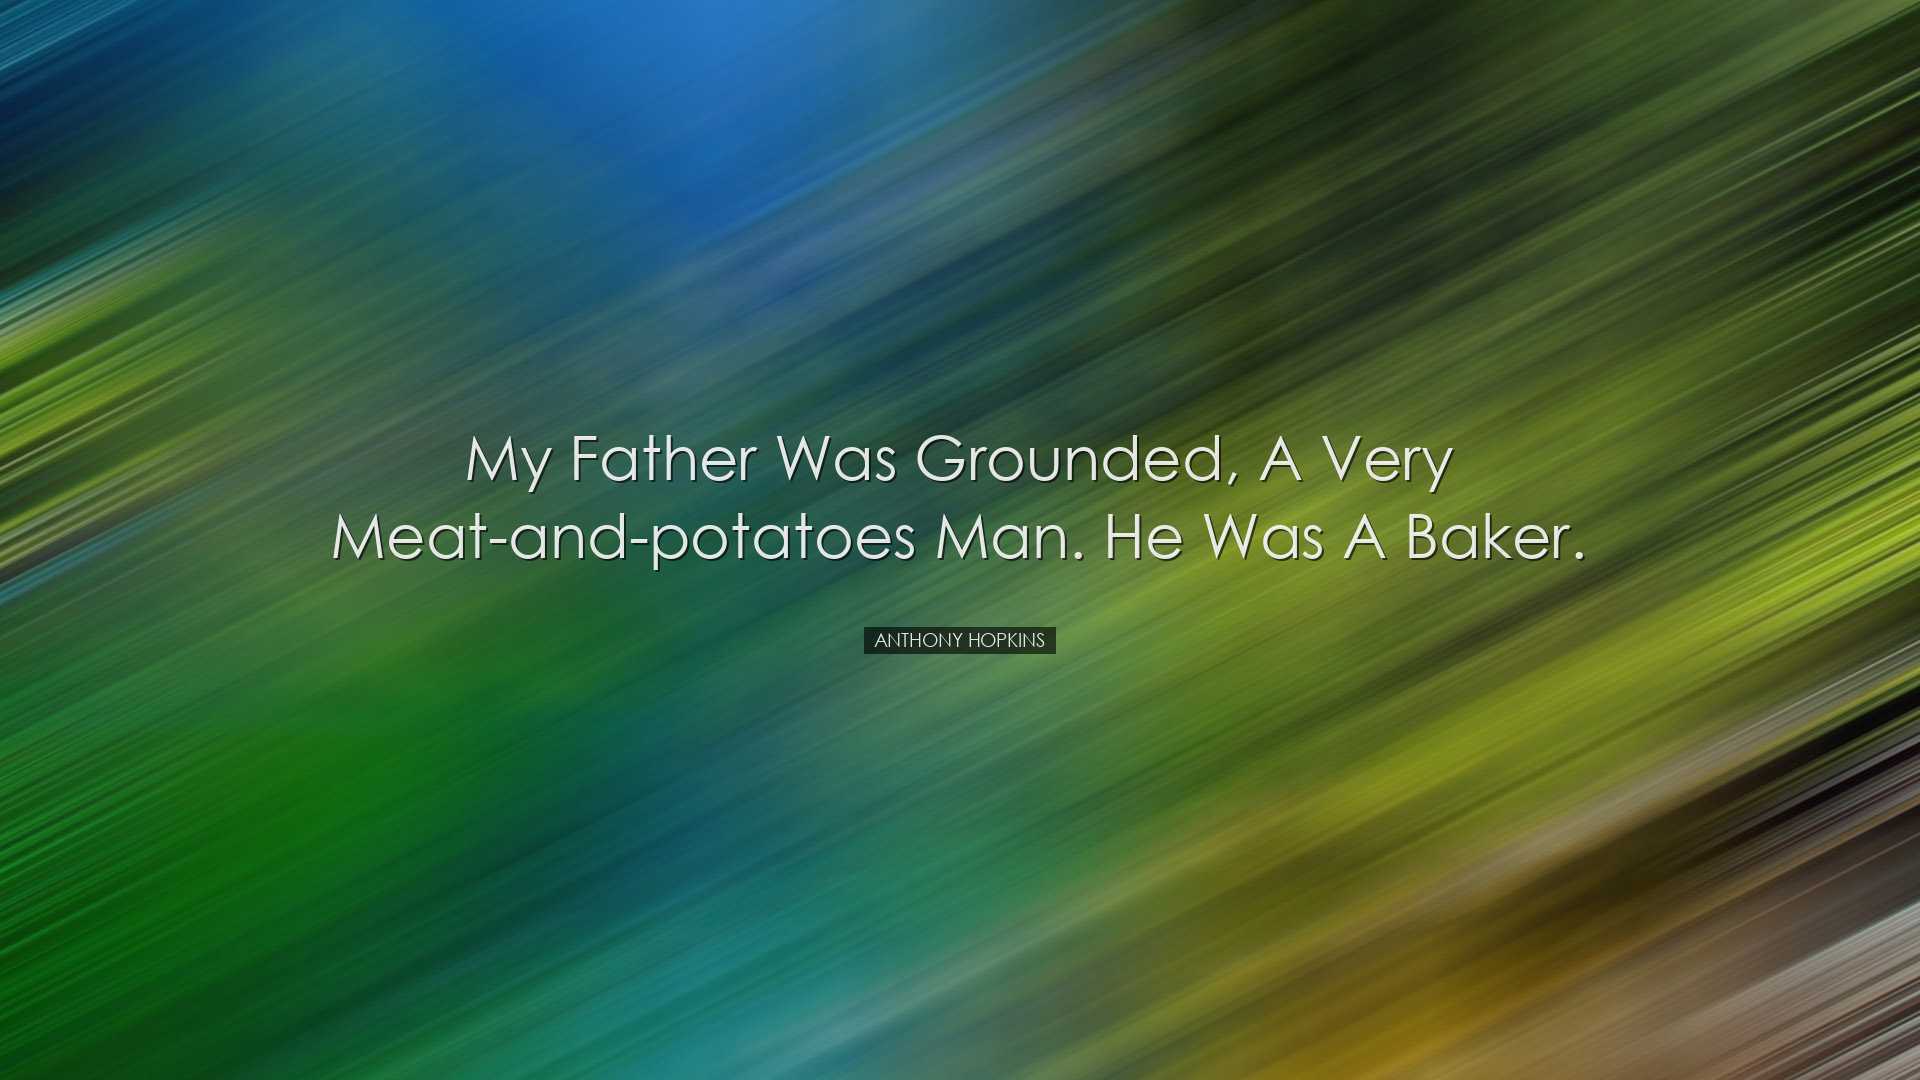 My father was grounded, a very meat-and-potatoes man. He was a bak